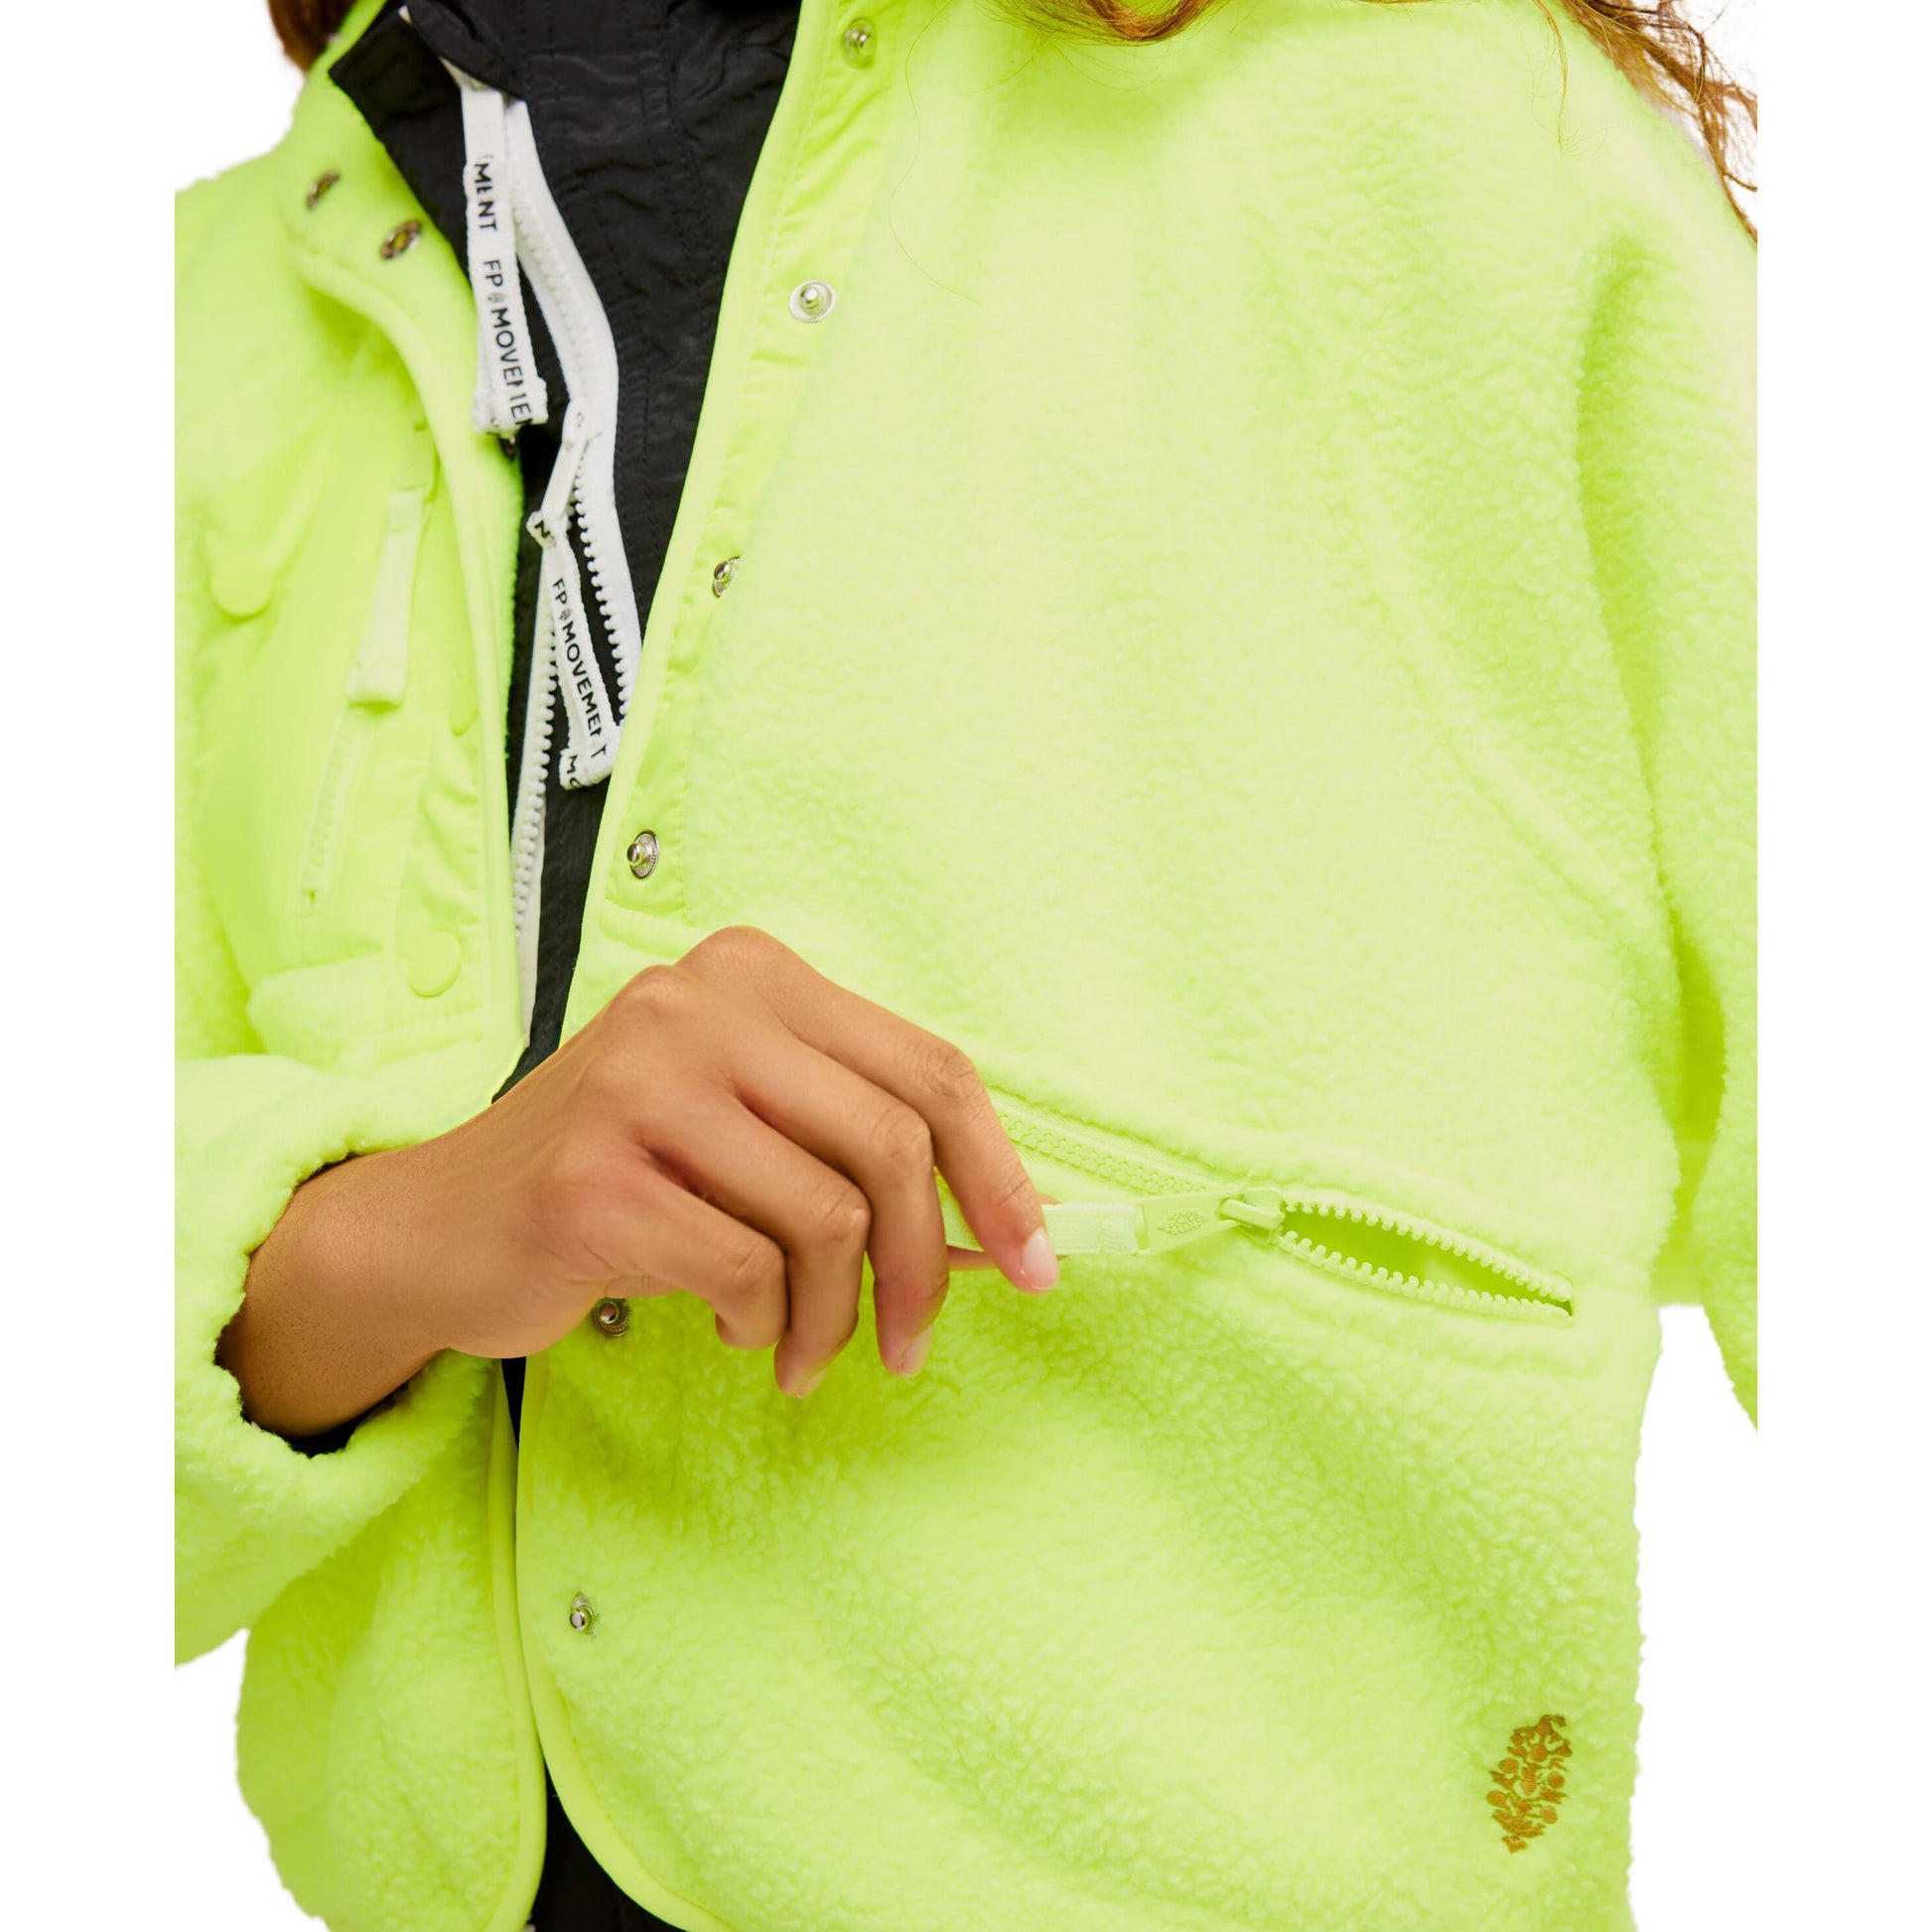 Close-up of a person wearing a Free People Movement Hit The Slopes Jacket in Highlighter, unzipping the zippered pockets with detailed embroidery near the zip.